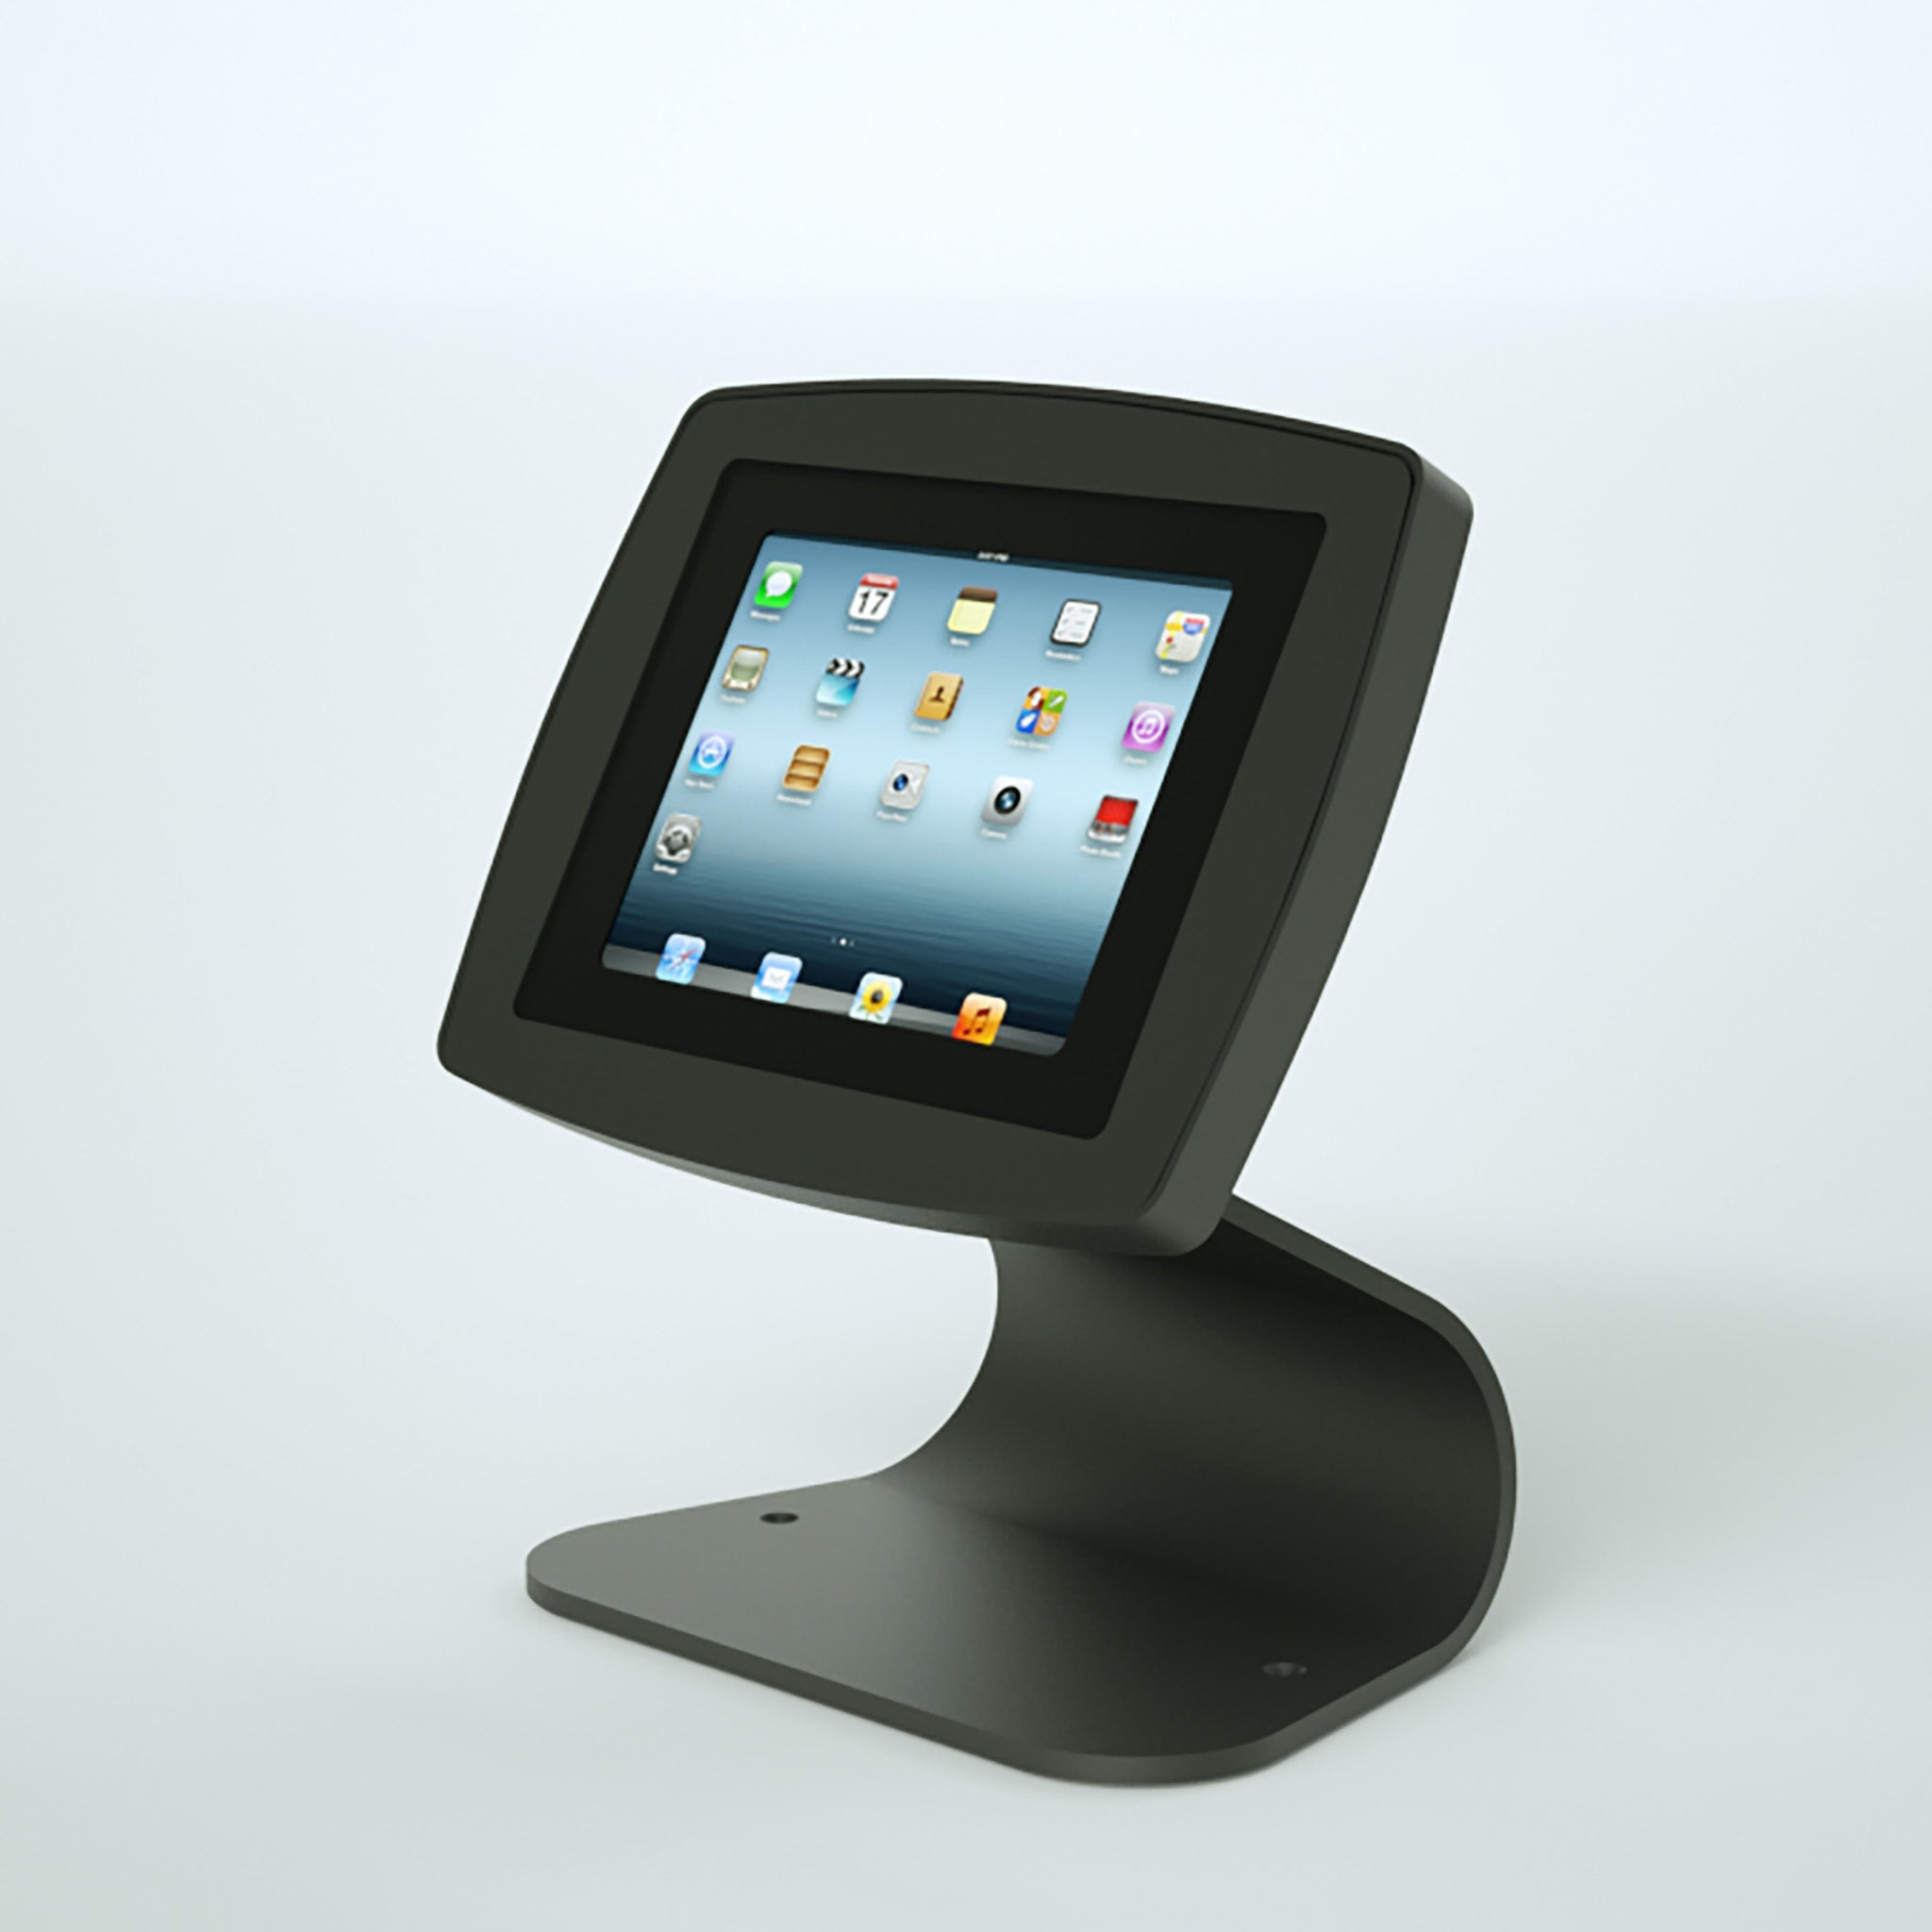 Grey Curve iPad and Tablet Desktop stand.